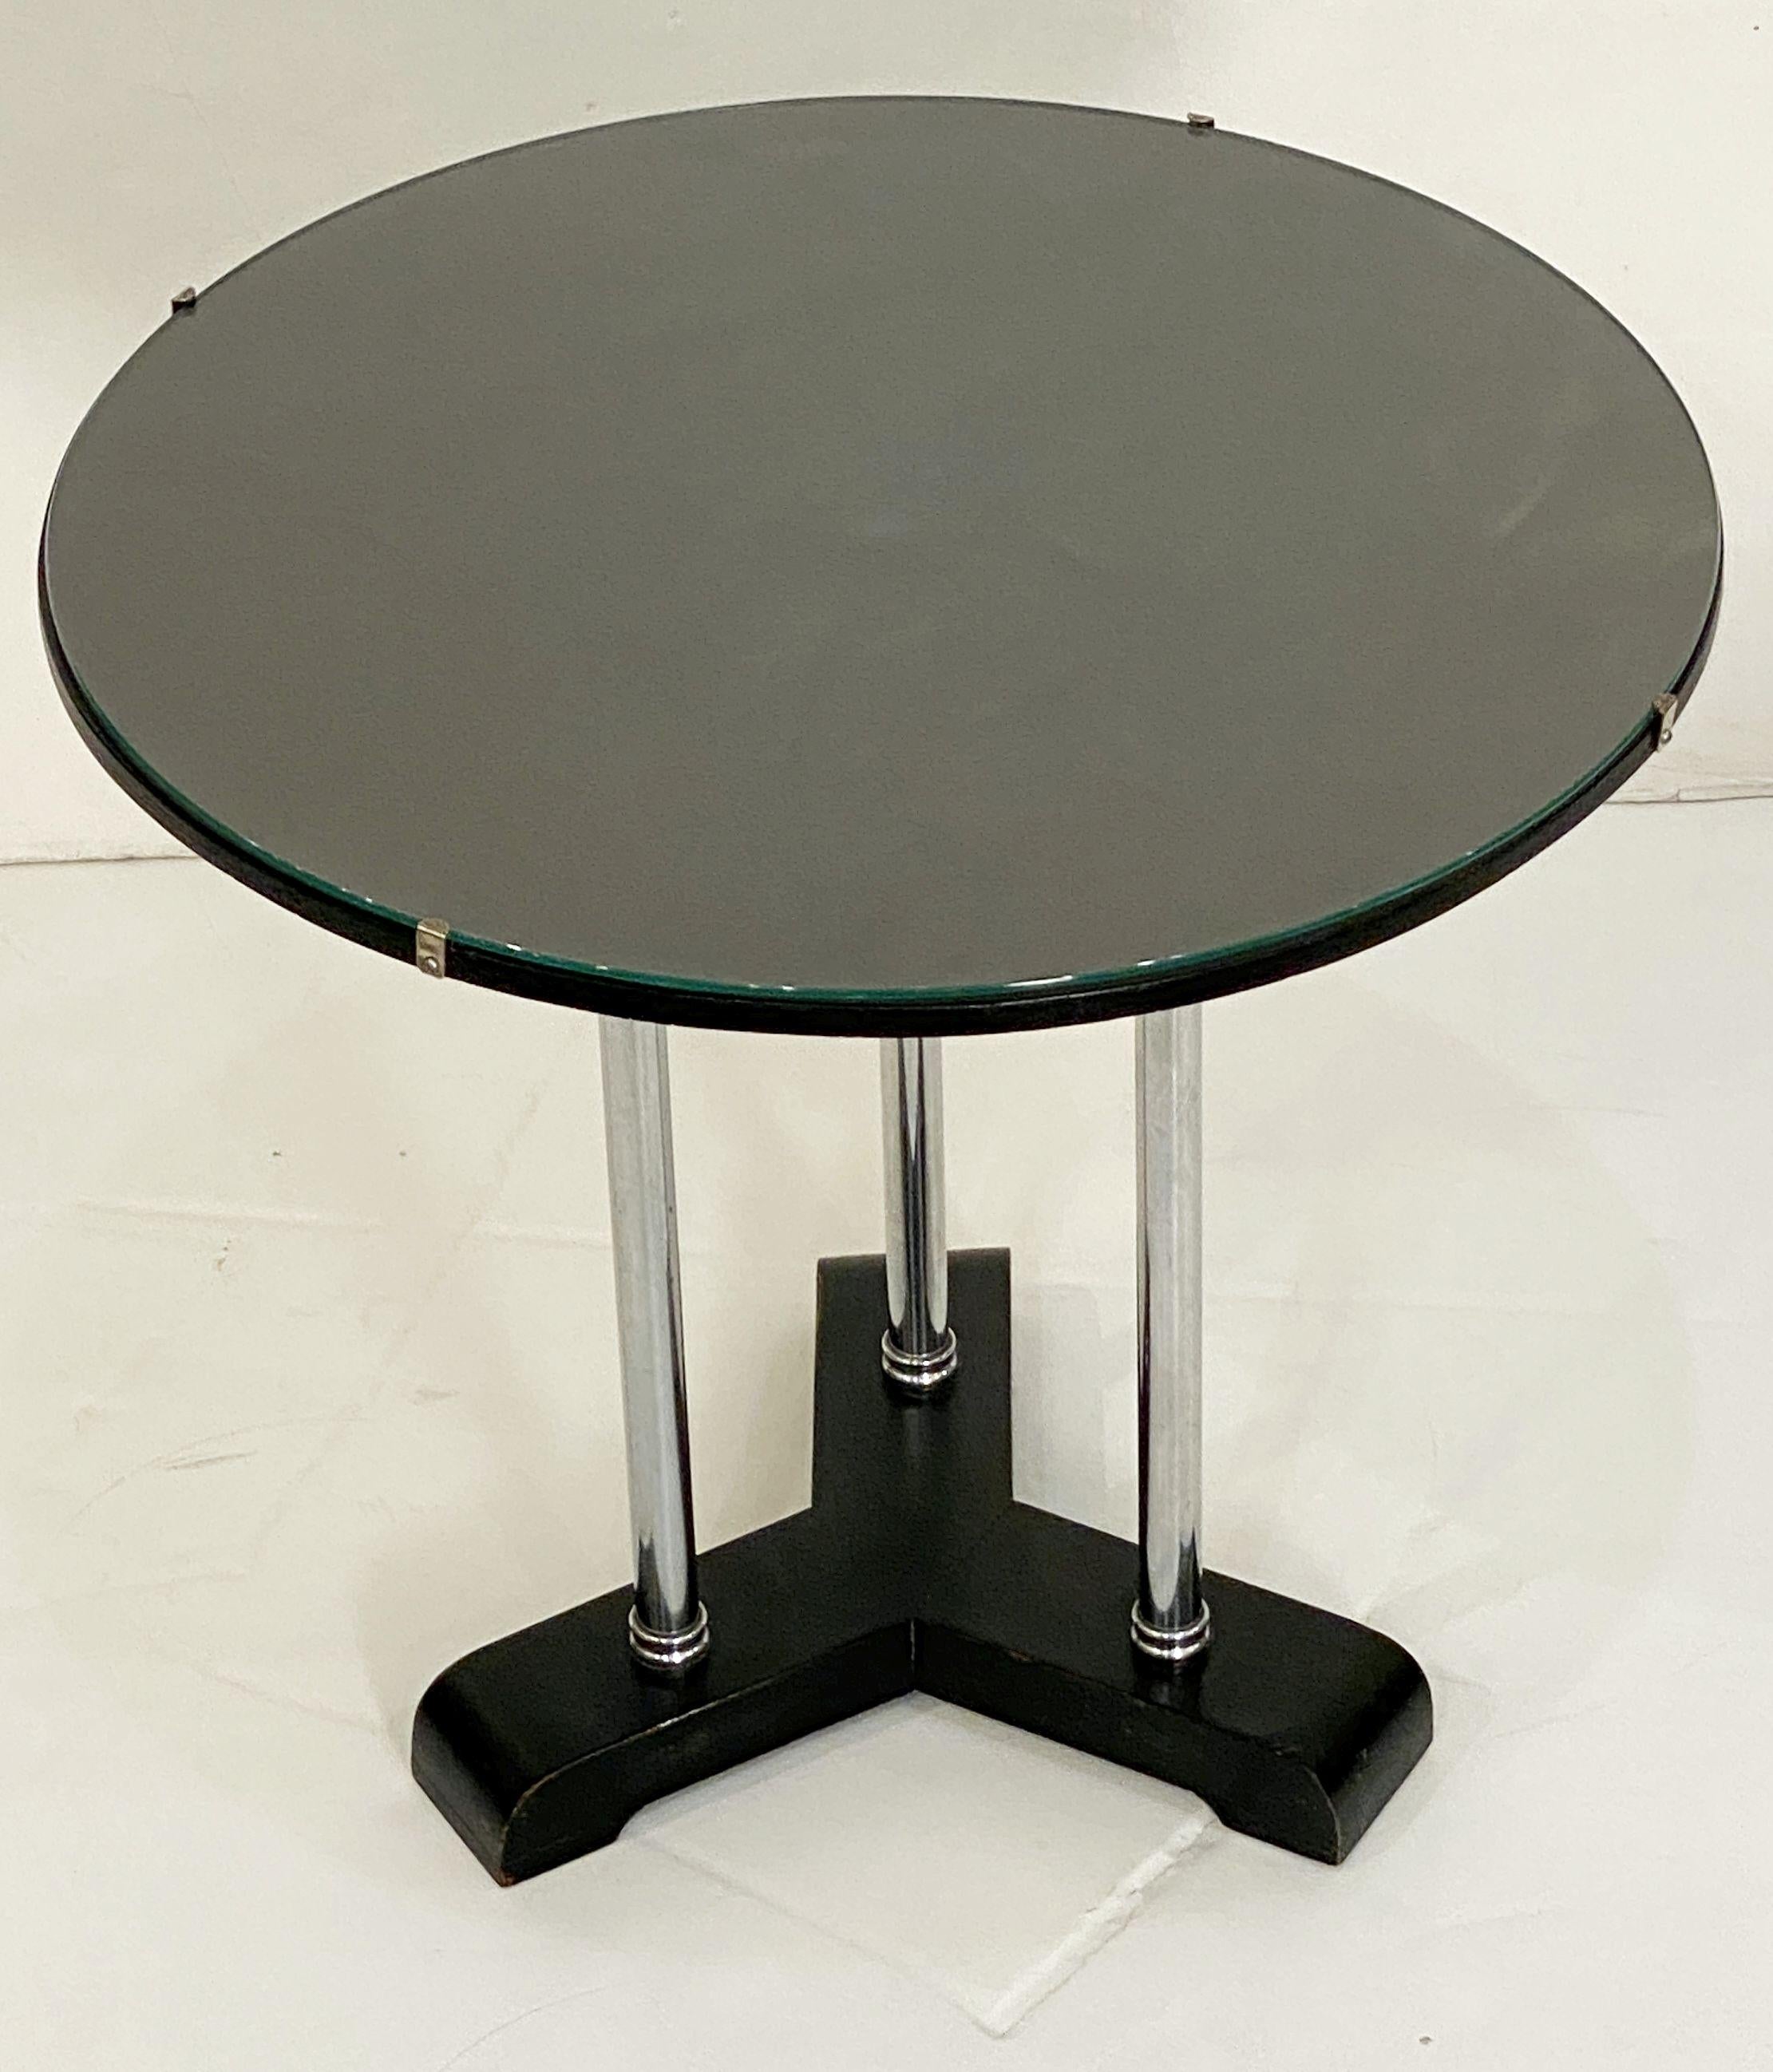 English Art Deco Round Drinks Tripod Table of Chrome, Ebonized Wood, and Glass For Sale 6